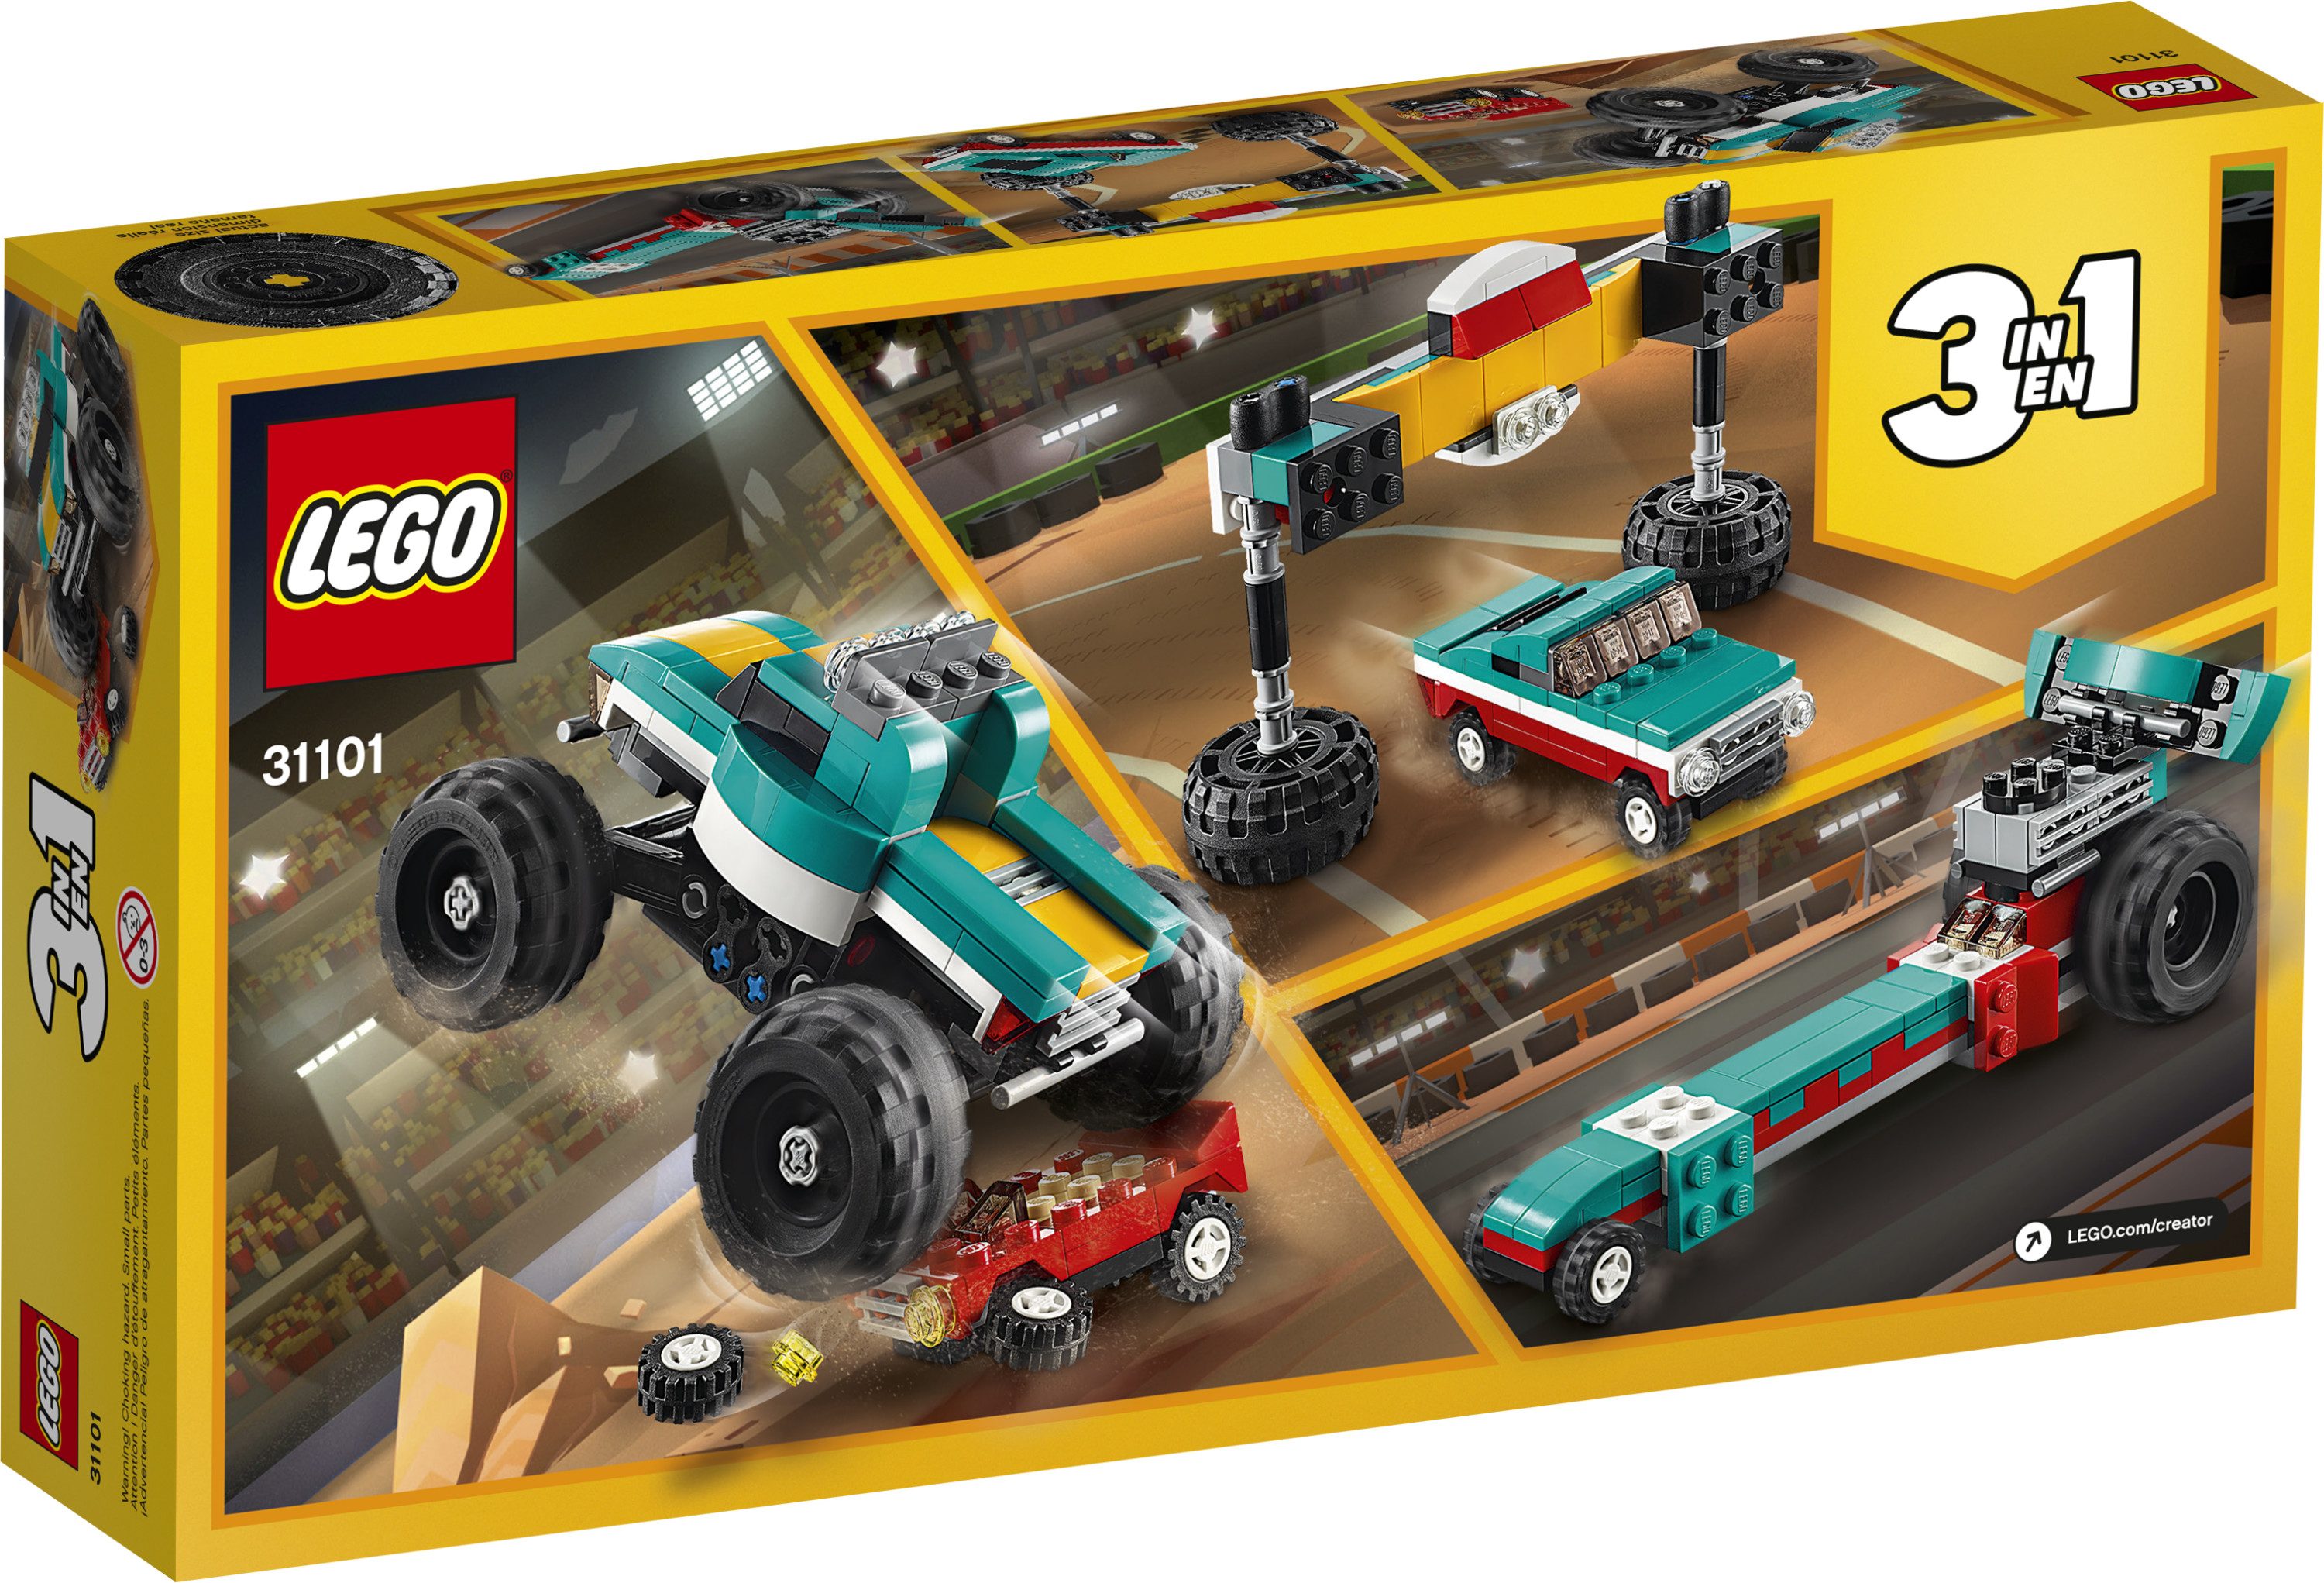 LEGO Creator 3in1 Monster Truck Toy 31101 Cool Building Kit for Kids (163 Pieces) - image 5 of 11